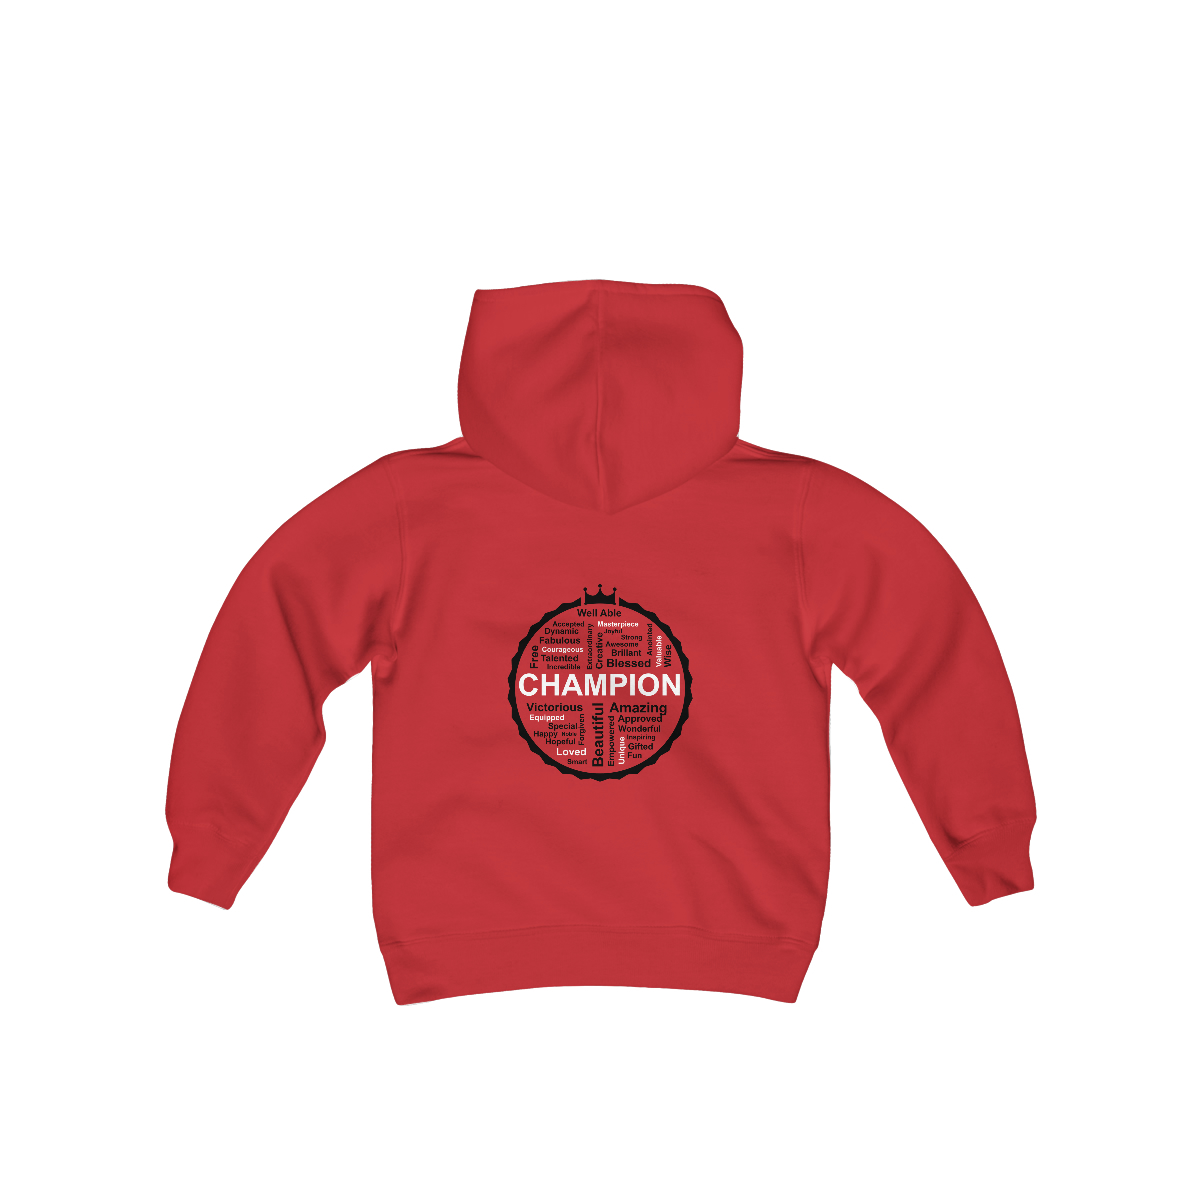 CHAMPION Kids Hoodie Club - Needs Champions Special Ministry